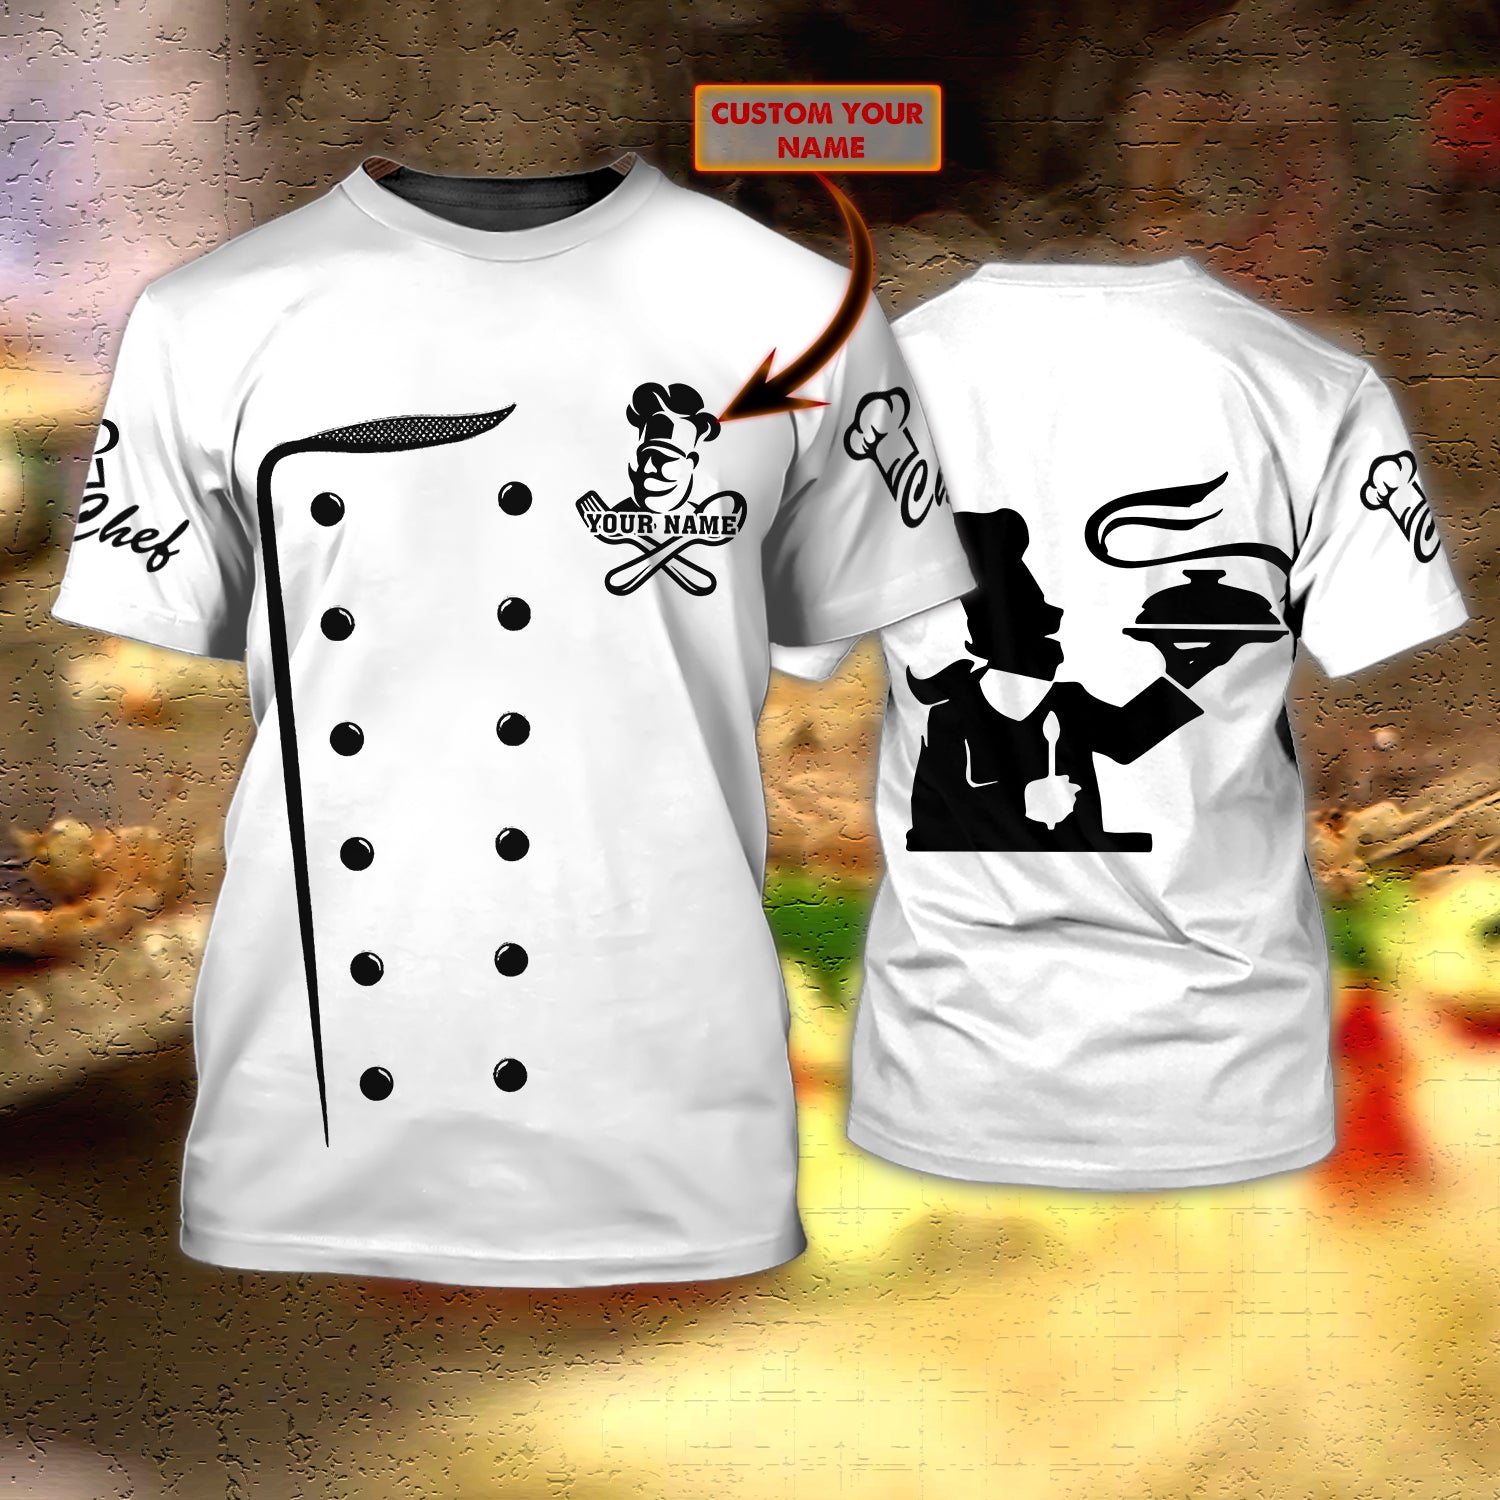 Chef - Personalized Name 3D Tshirt 005- H98